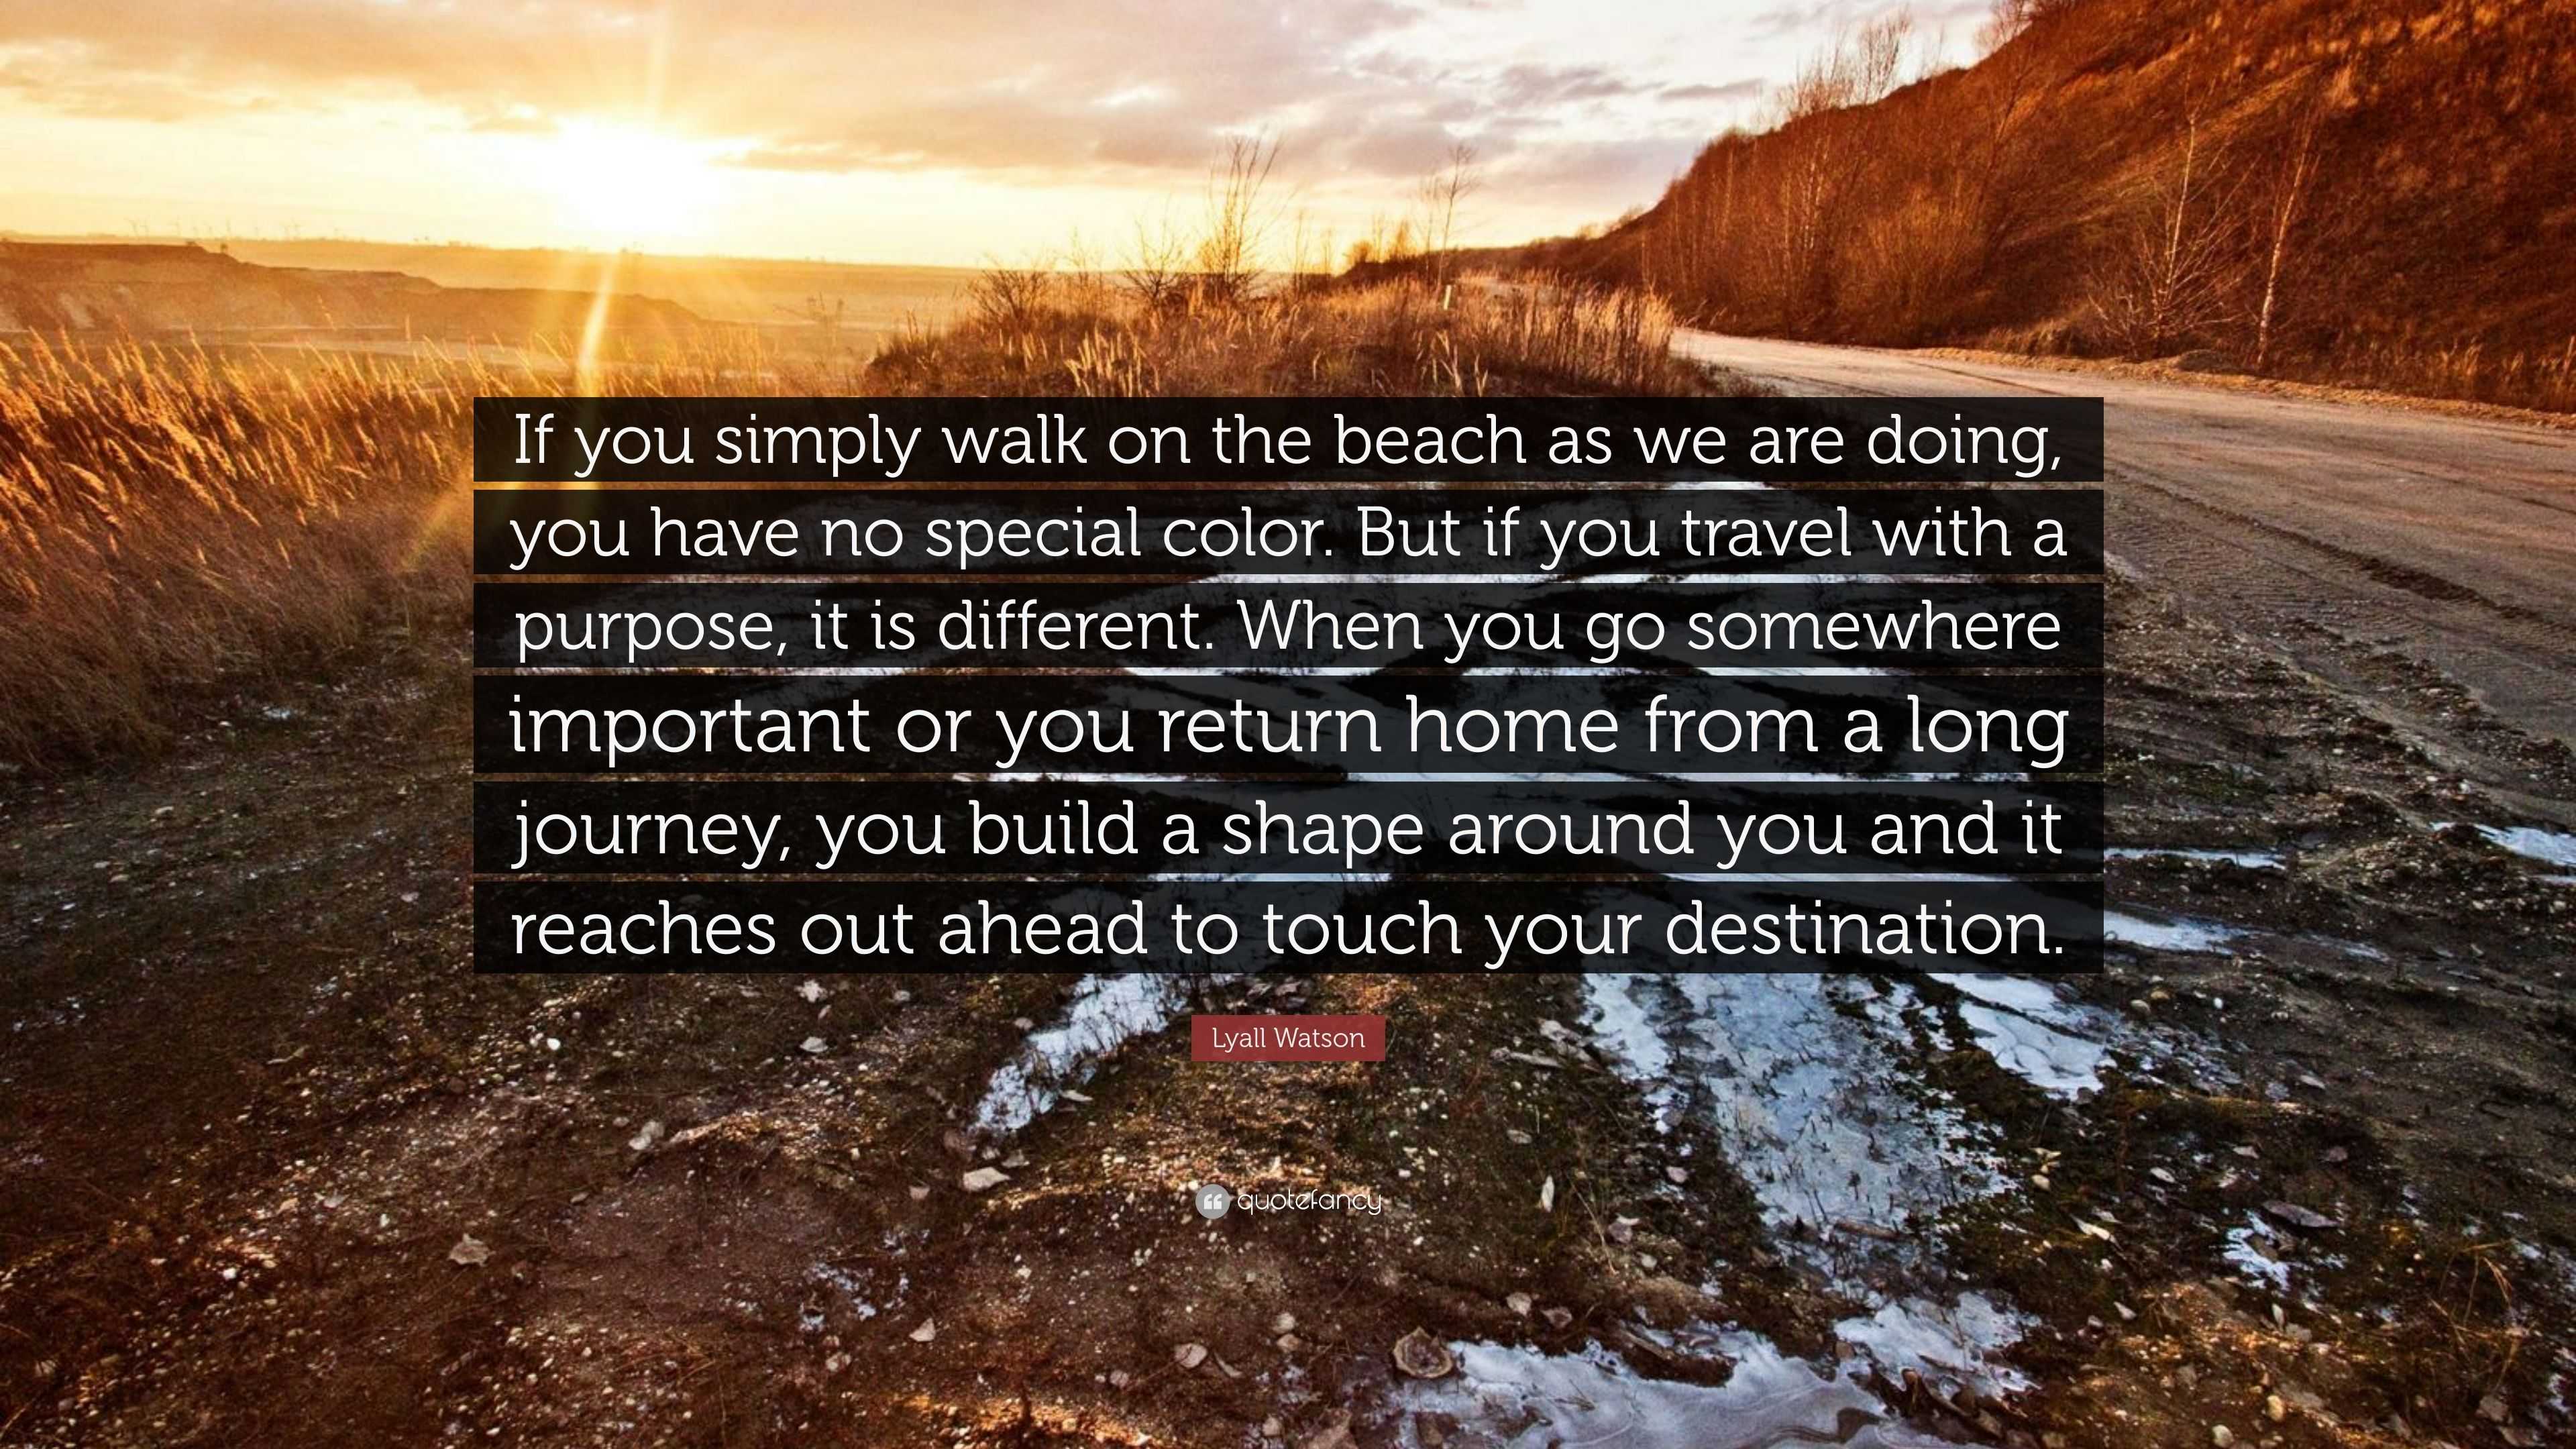 Lyall Watson Quote: “If you simply walk on the beach as we are doing, you  have no special color. But if you travel with a purpose, it is diff...”